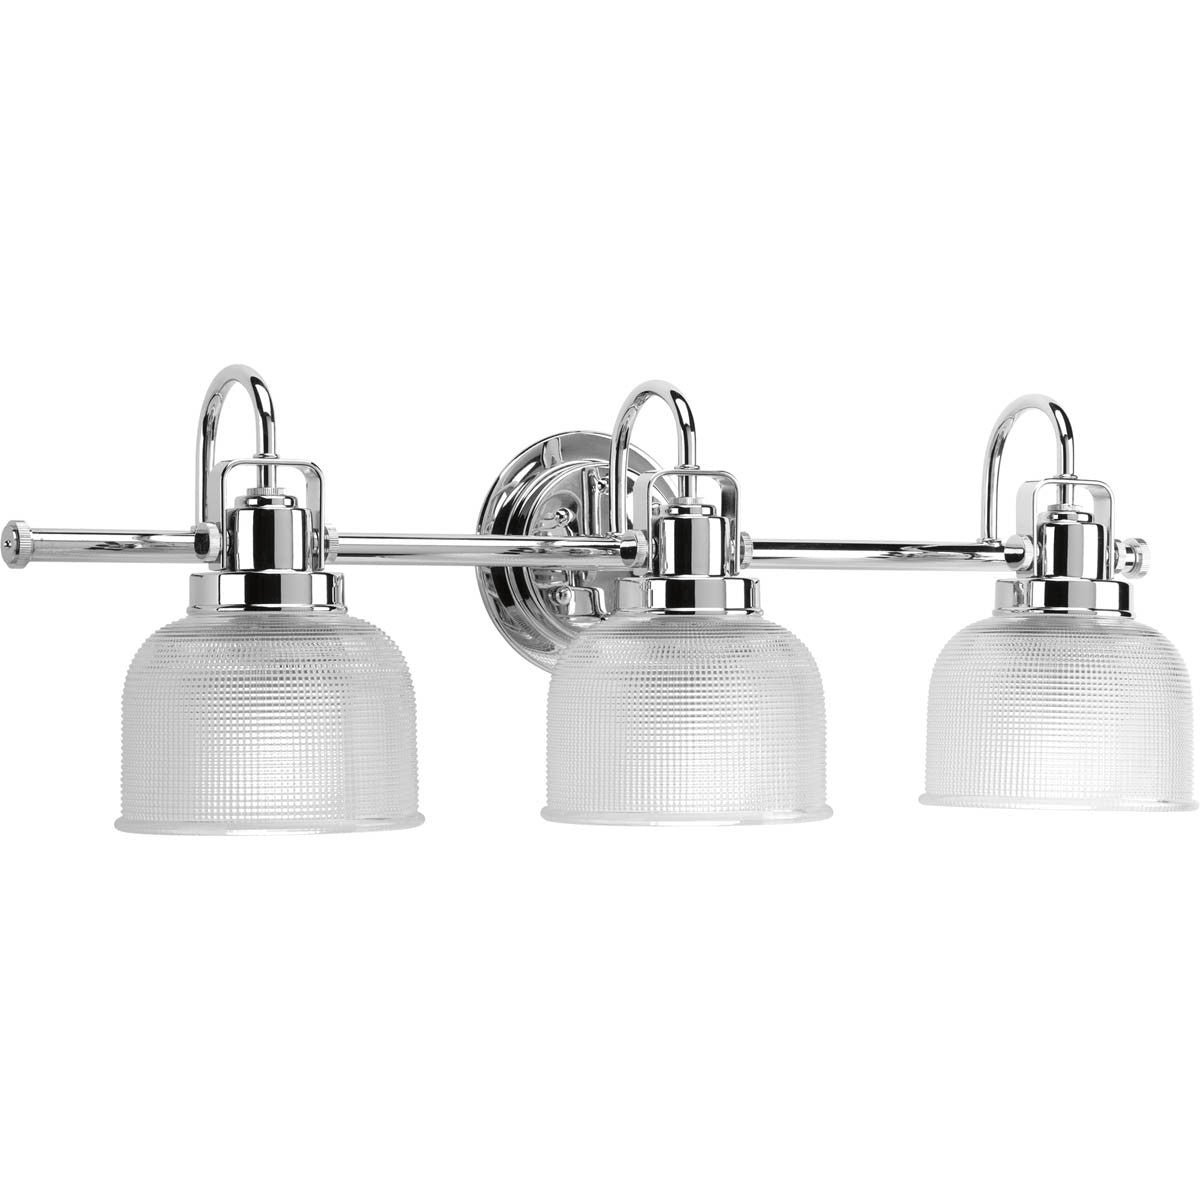 Archie 3 Light Vanity in Polished Chrome by Progress Lighting P2992-15